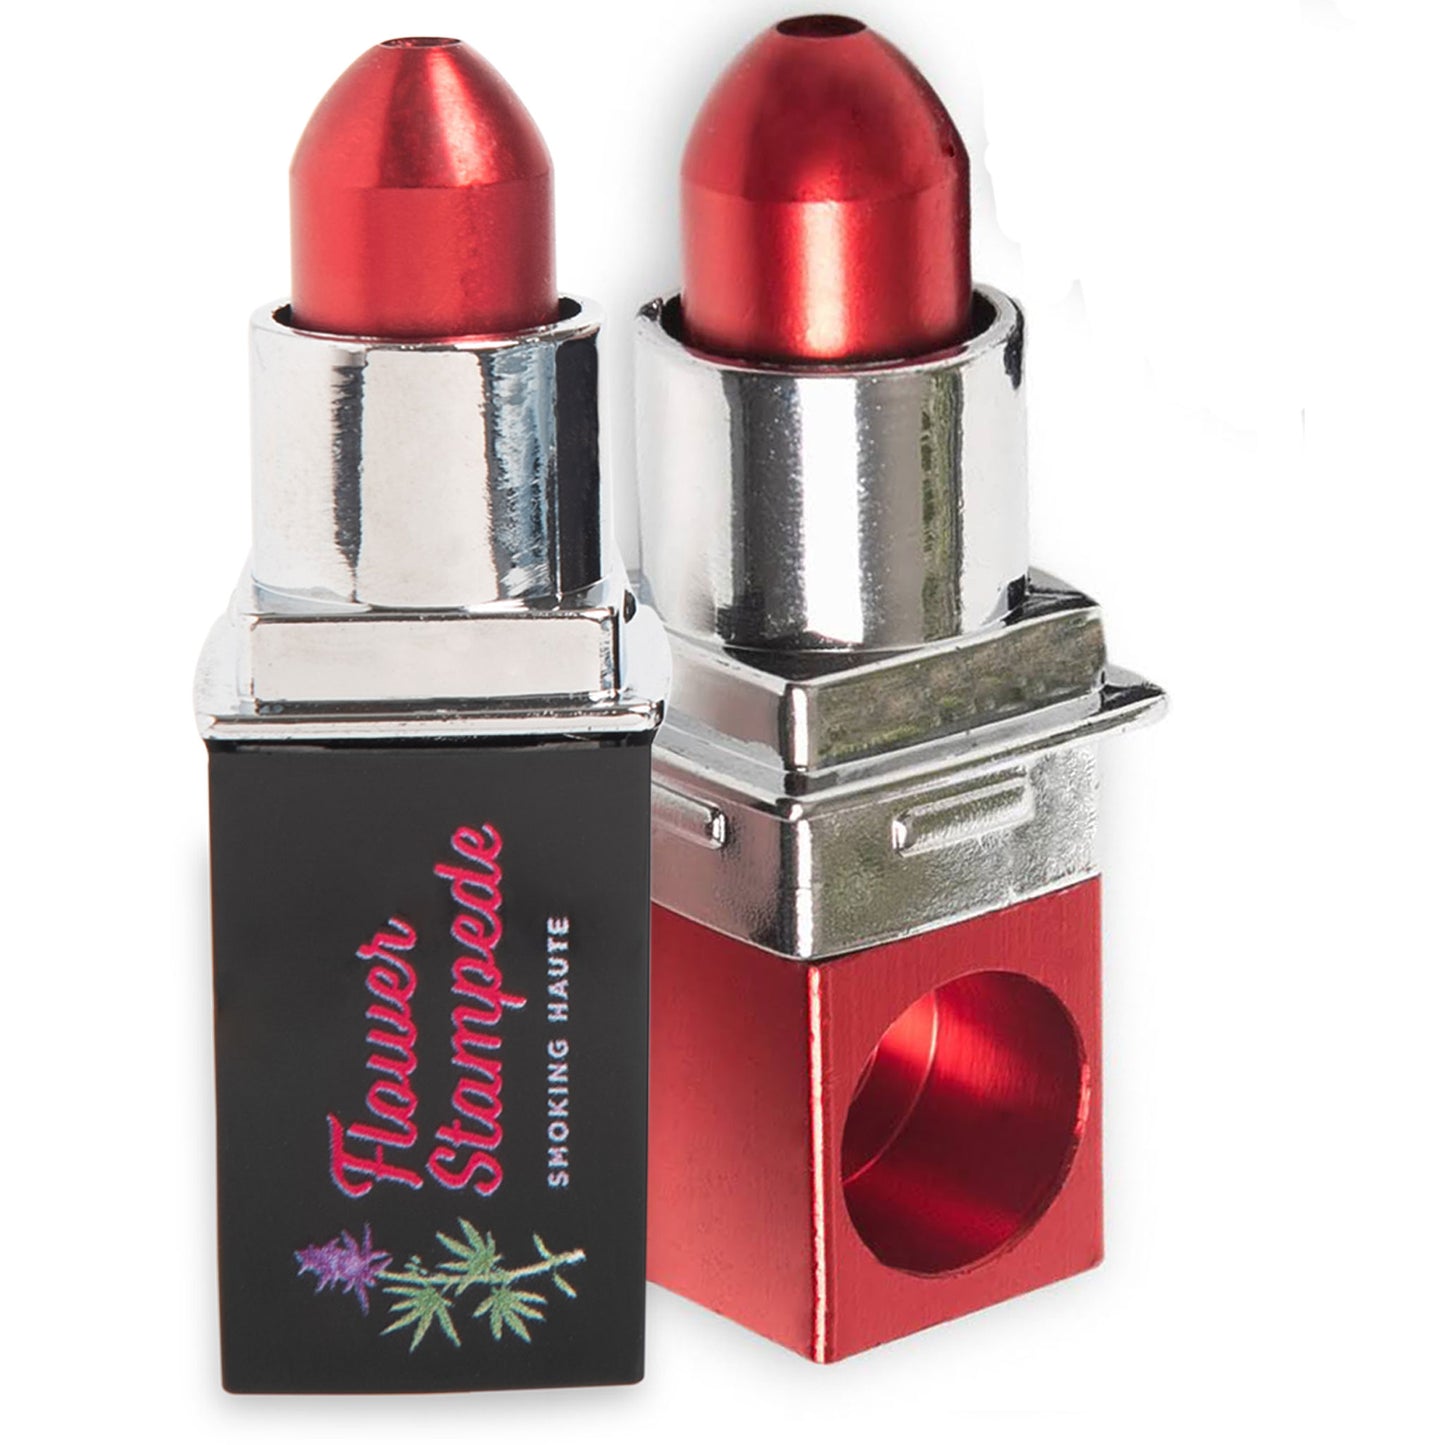 Adorable right? And so discreet.  You can light up anywhere with the Flower Stampede Lipstick Pipe.  Get a limited time BOGO deal on lipstick pipes.